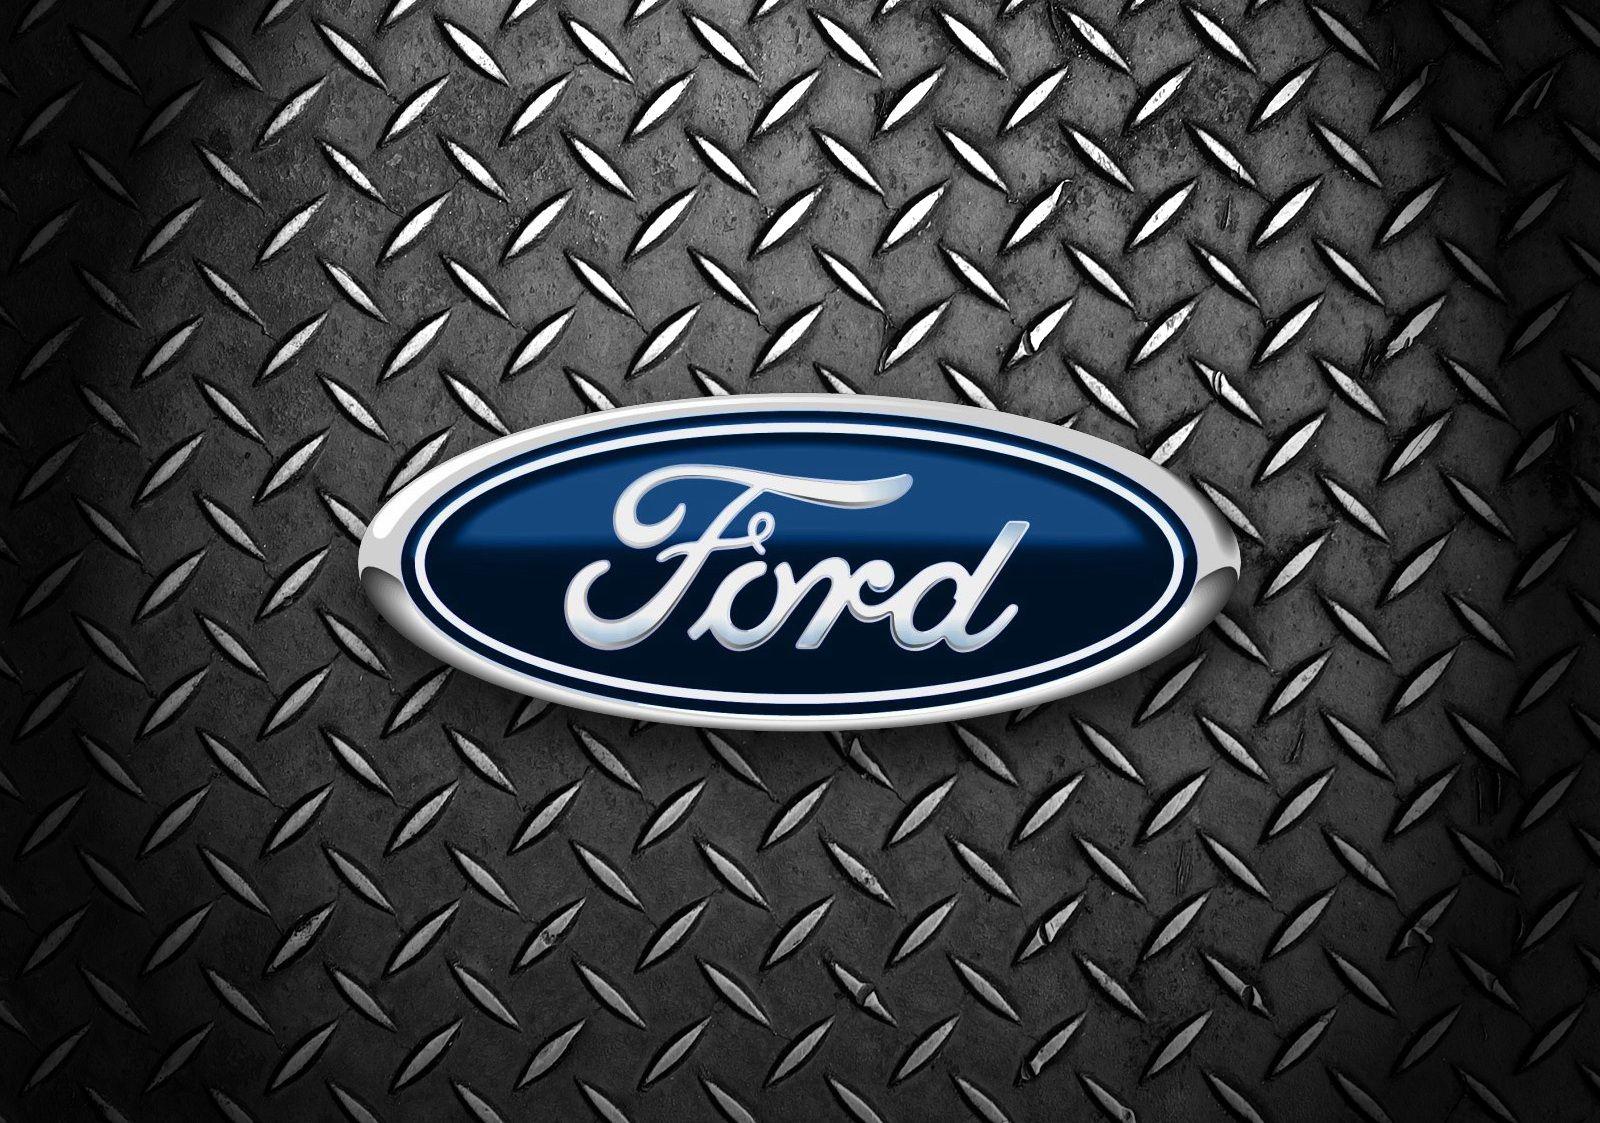 Blue Oval Brand Logo - Ford Logo, Ford Car Symbol Meaning and History | Car Brand Names.com